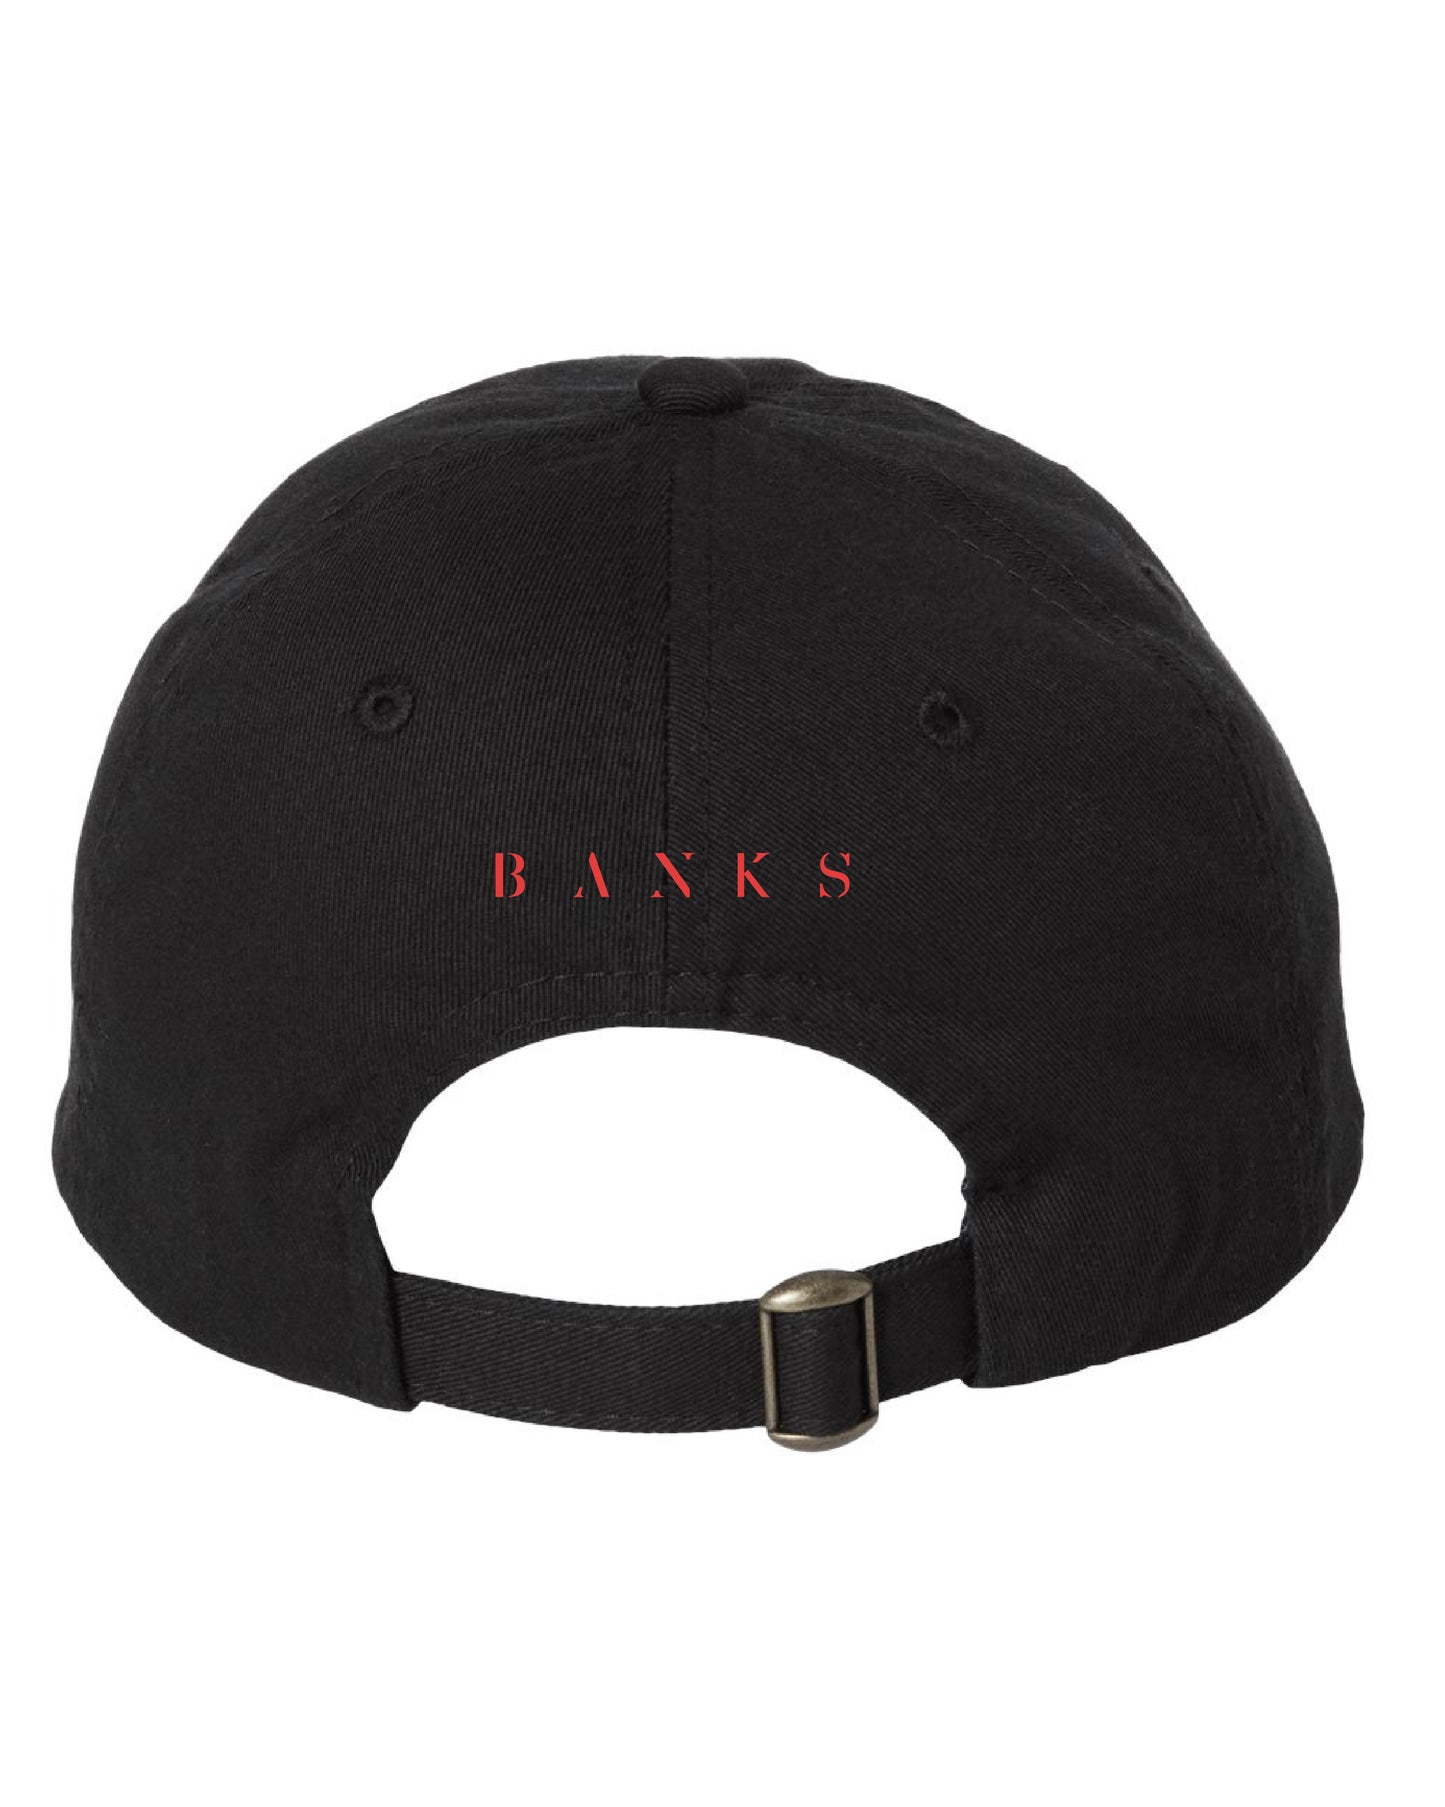 Someone write my new name down red and black hat product shot back Banks